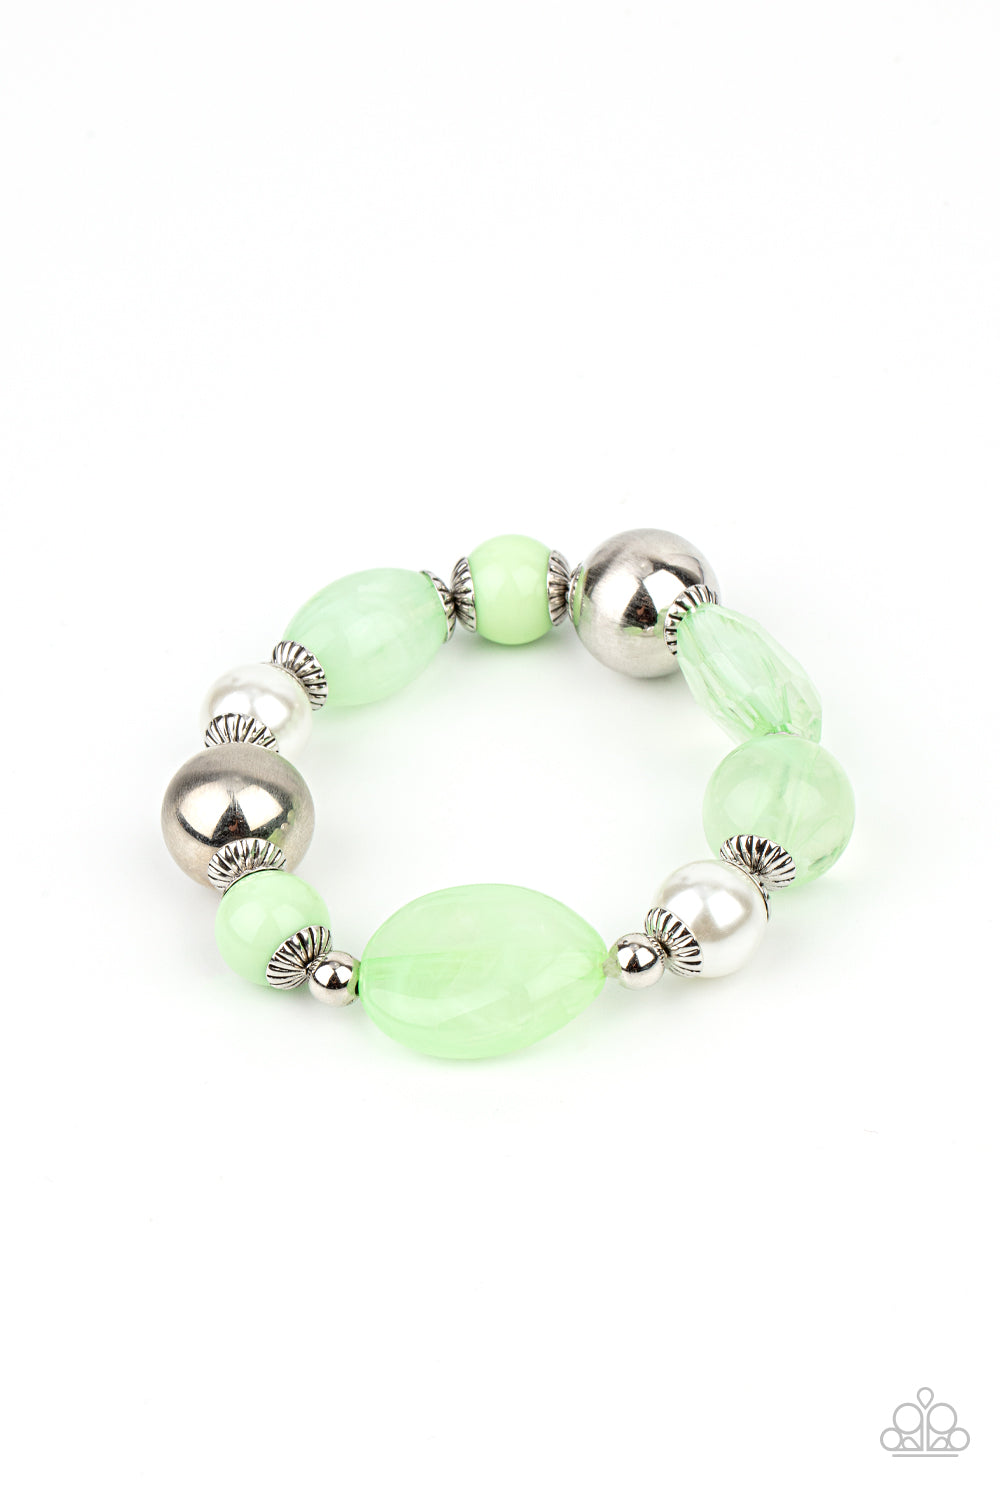 Resort Ritz Green Bracelet - Paparazzi Accessories  A lavish assortment of white pearls, silver accents, and glassy and acrylic Green Ash beads are threaded along a stretchy band around the wrist for a refreshing pop of color.  Sold as one individual bracelet.